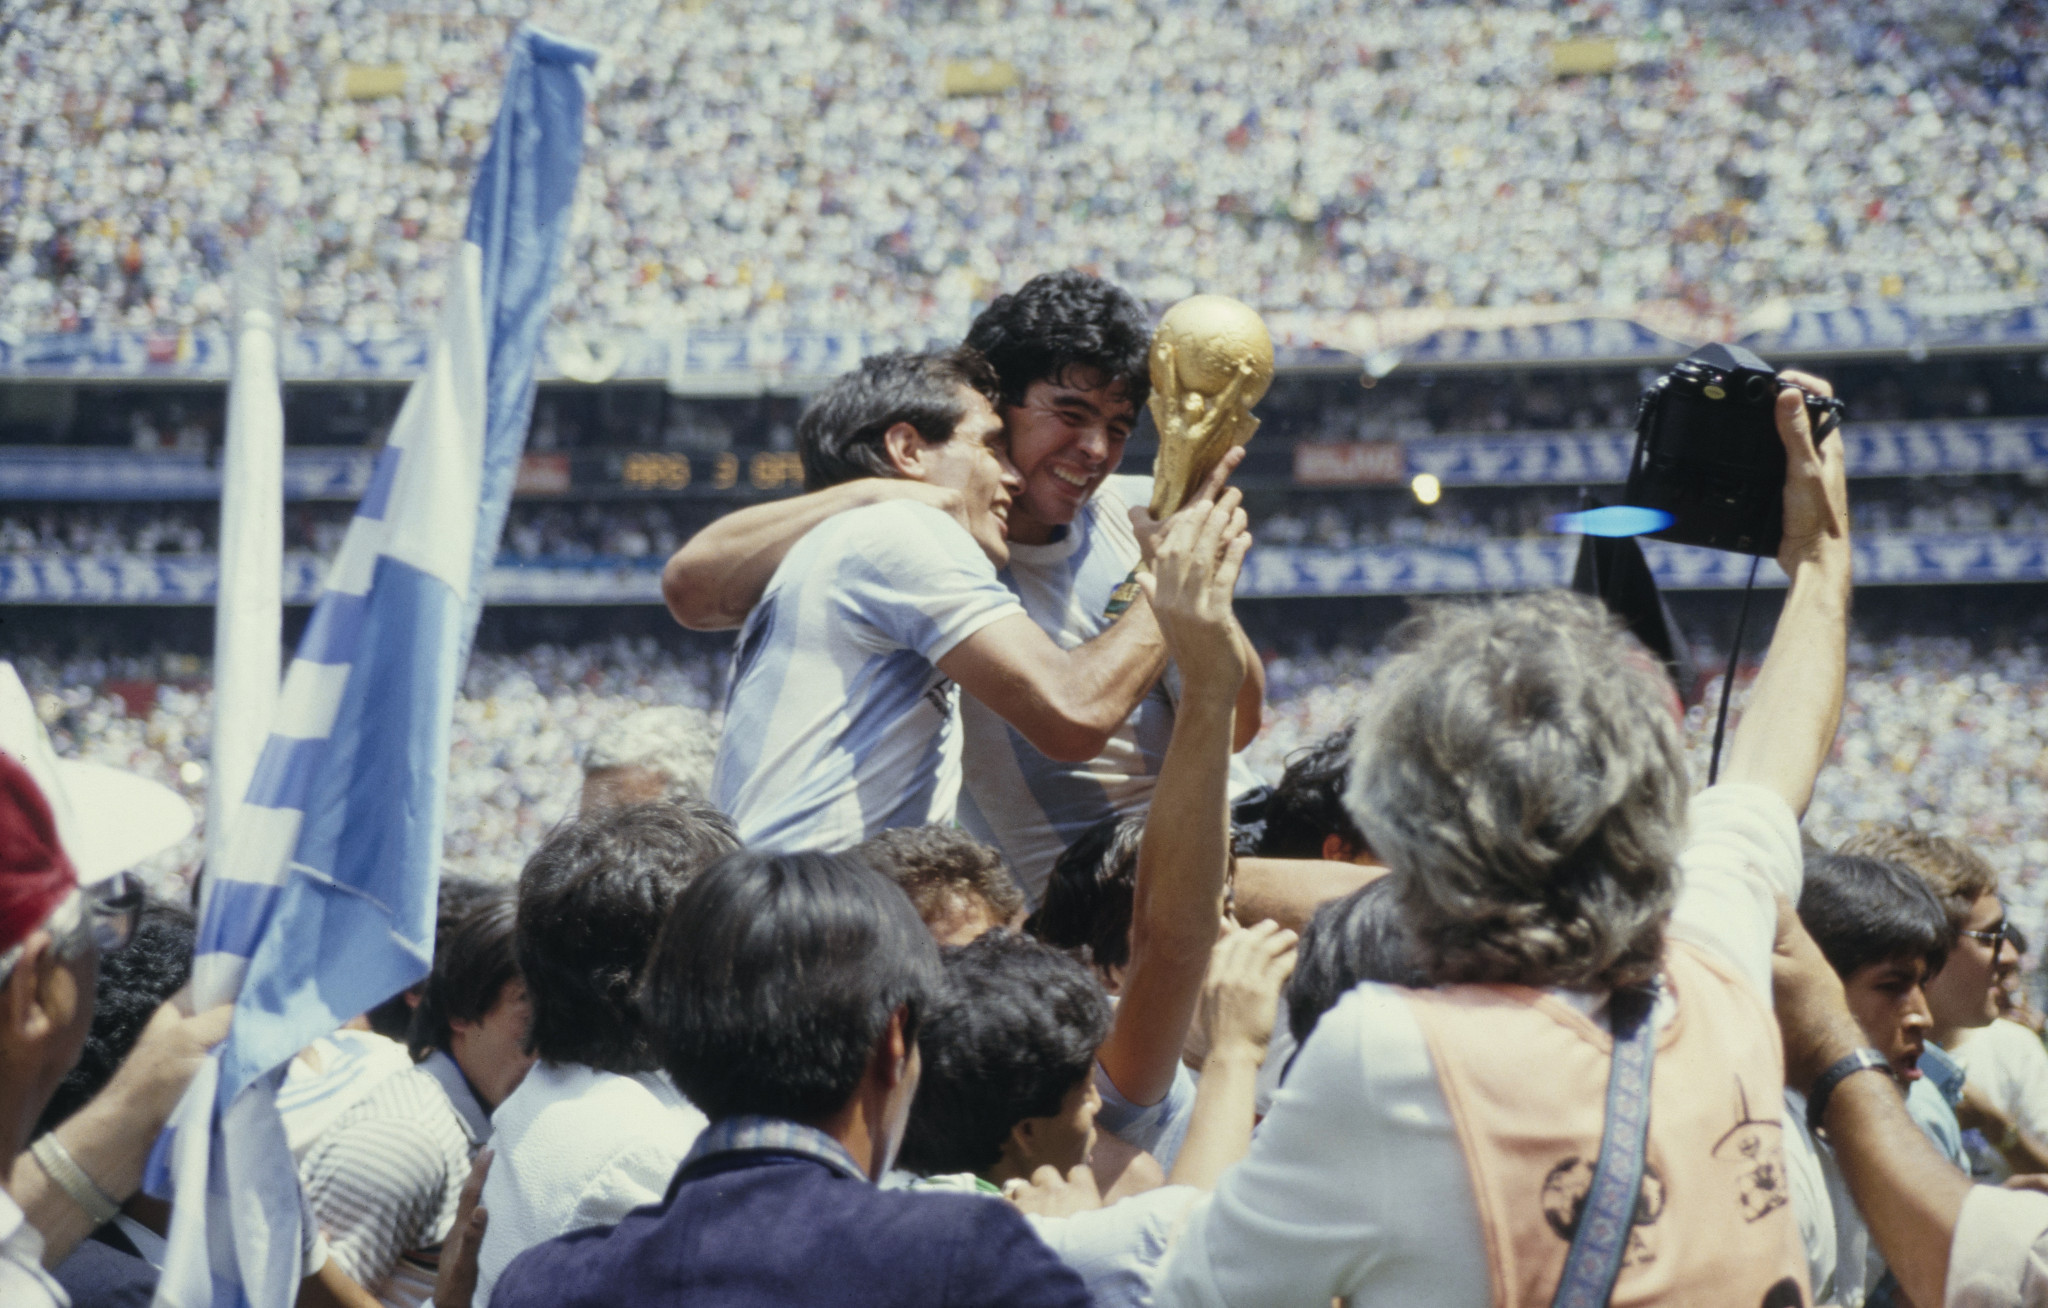 Maradona won the World Cup with Argenina, but his 